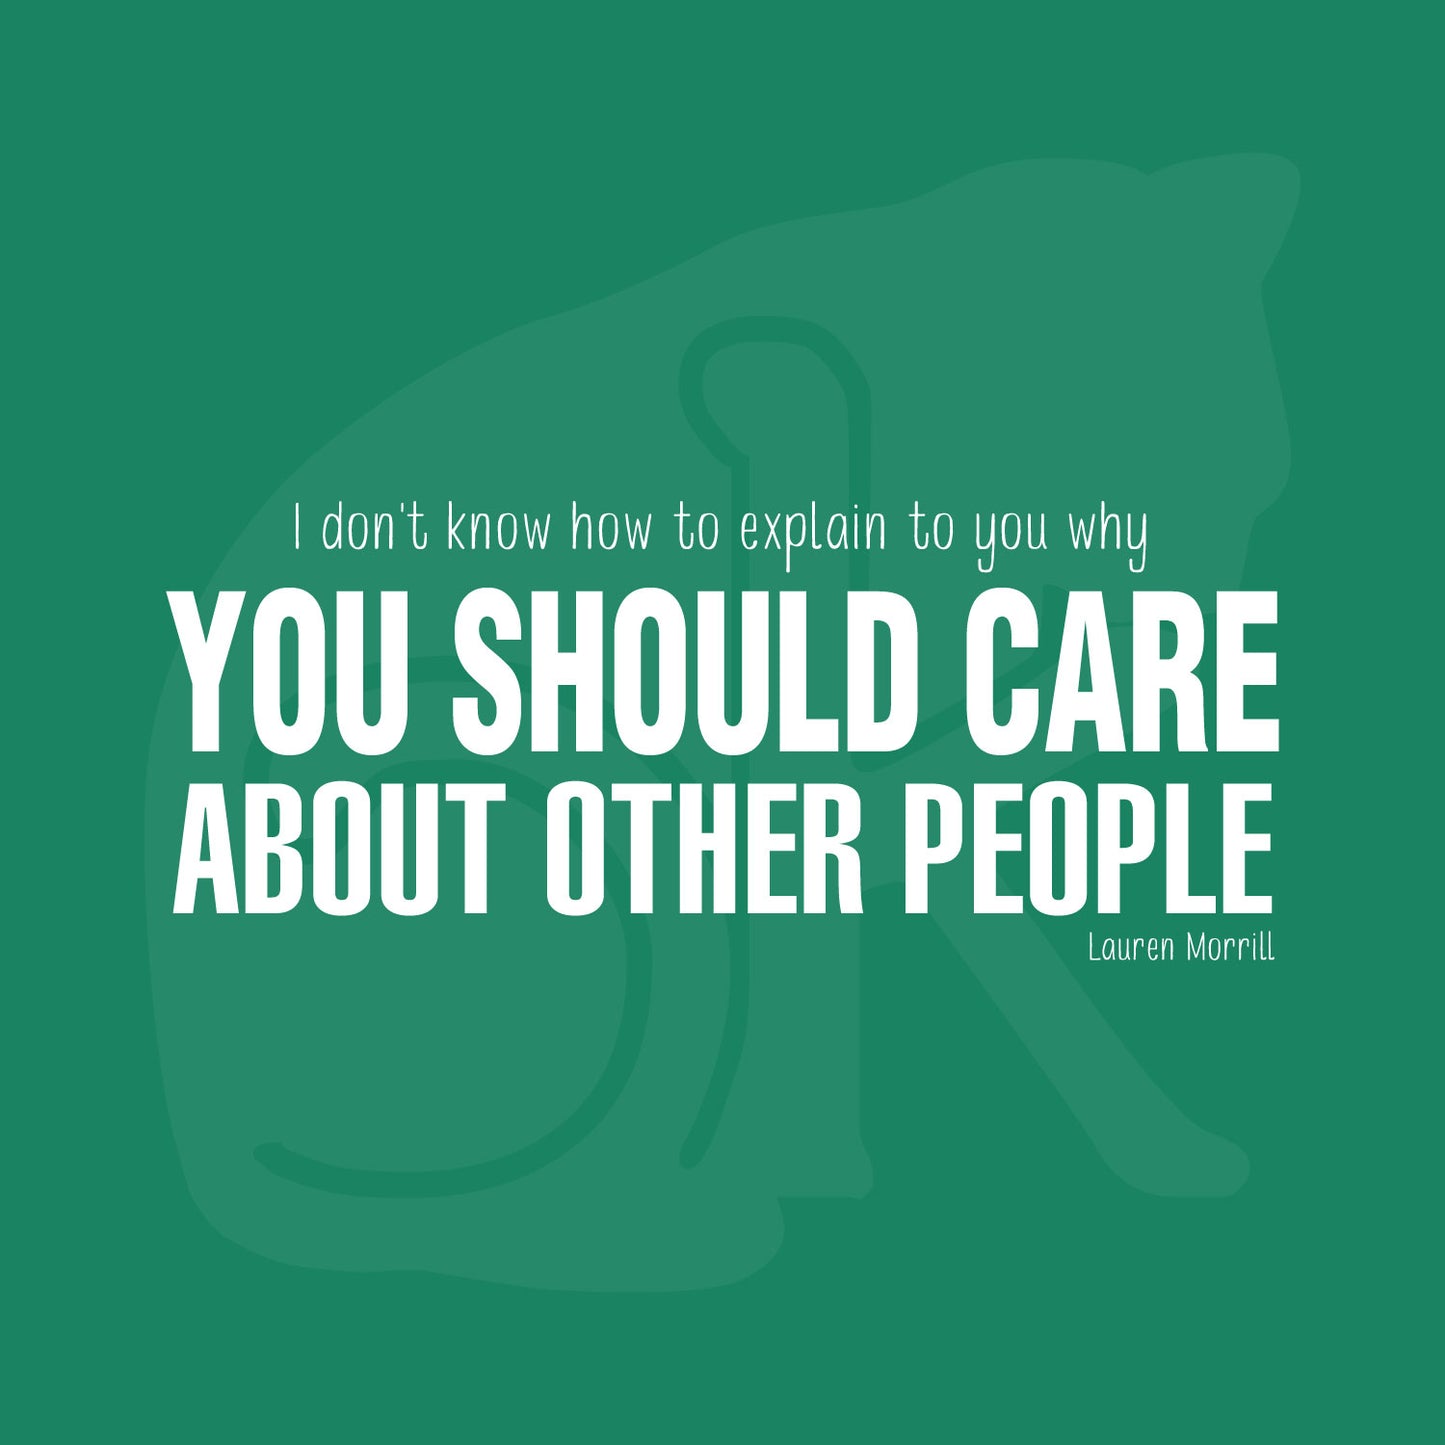 Standalone watermarked graphic of quote by Lauren Morrill: "I don't know how to explain to you why YOU SHOULD CARE ABOUT OTHER PEOPLE"